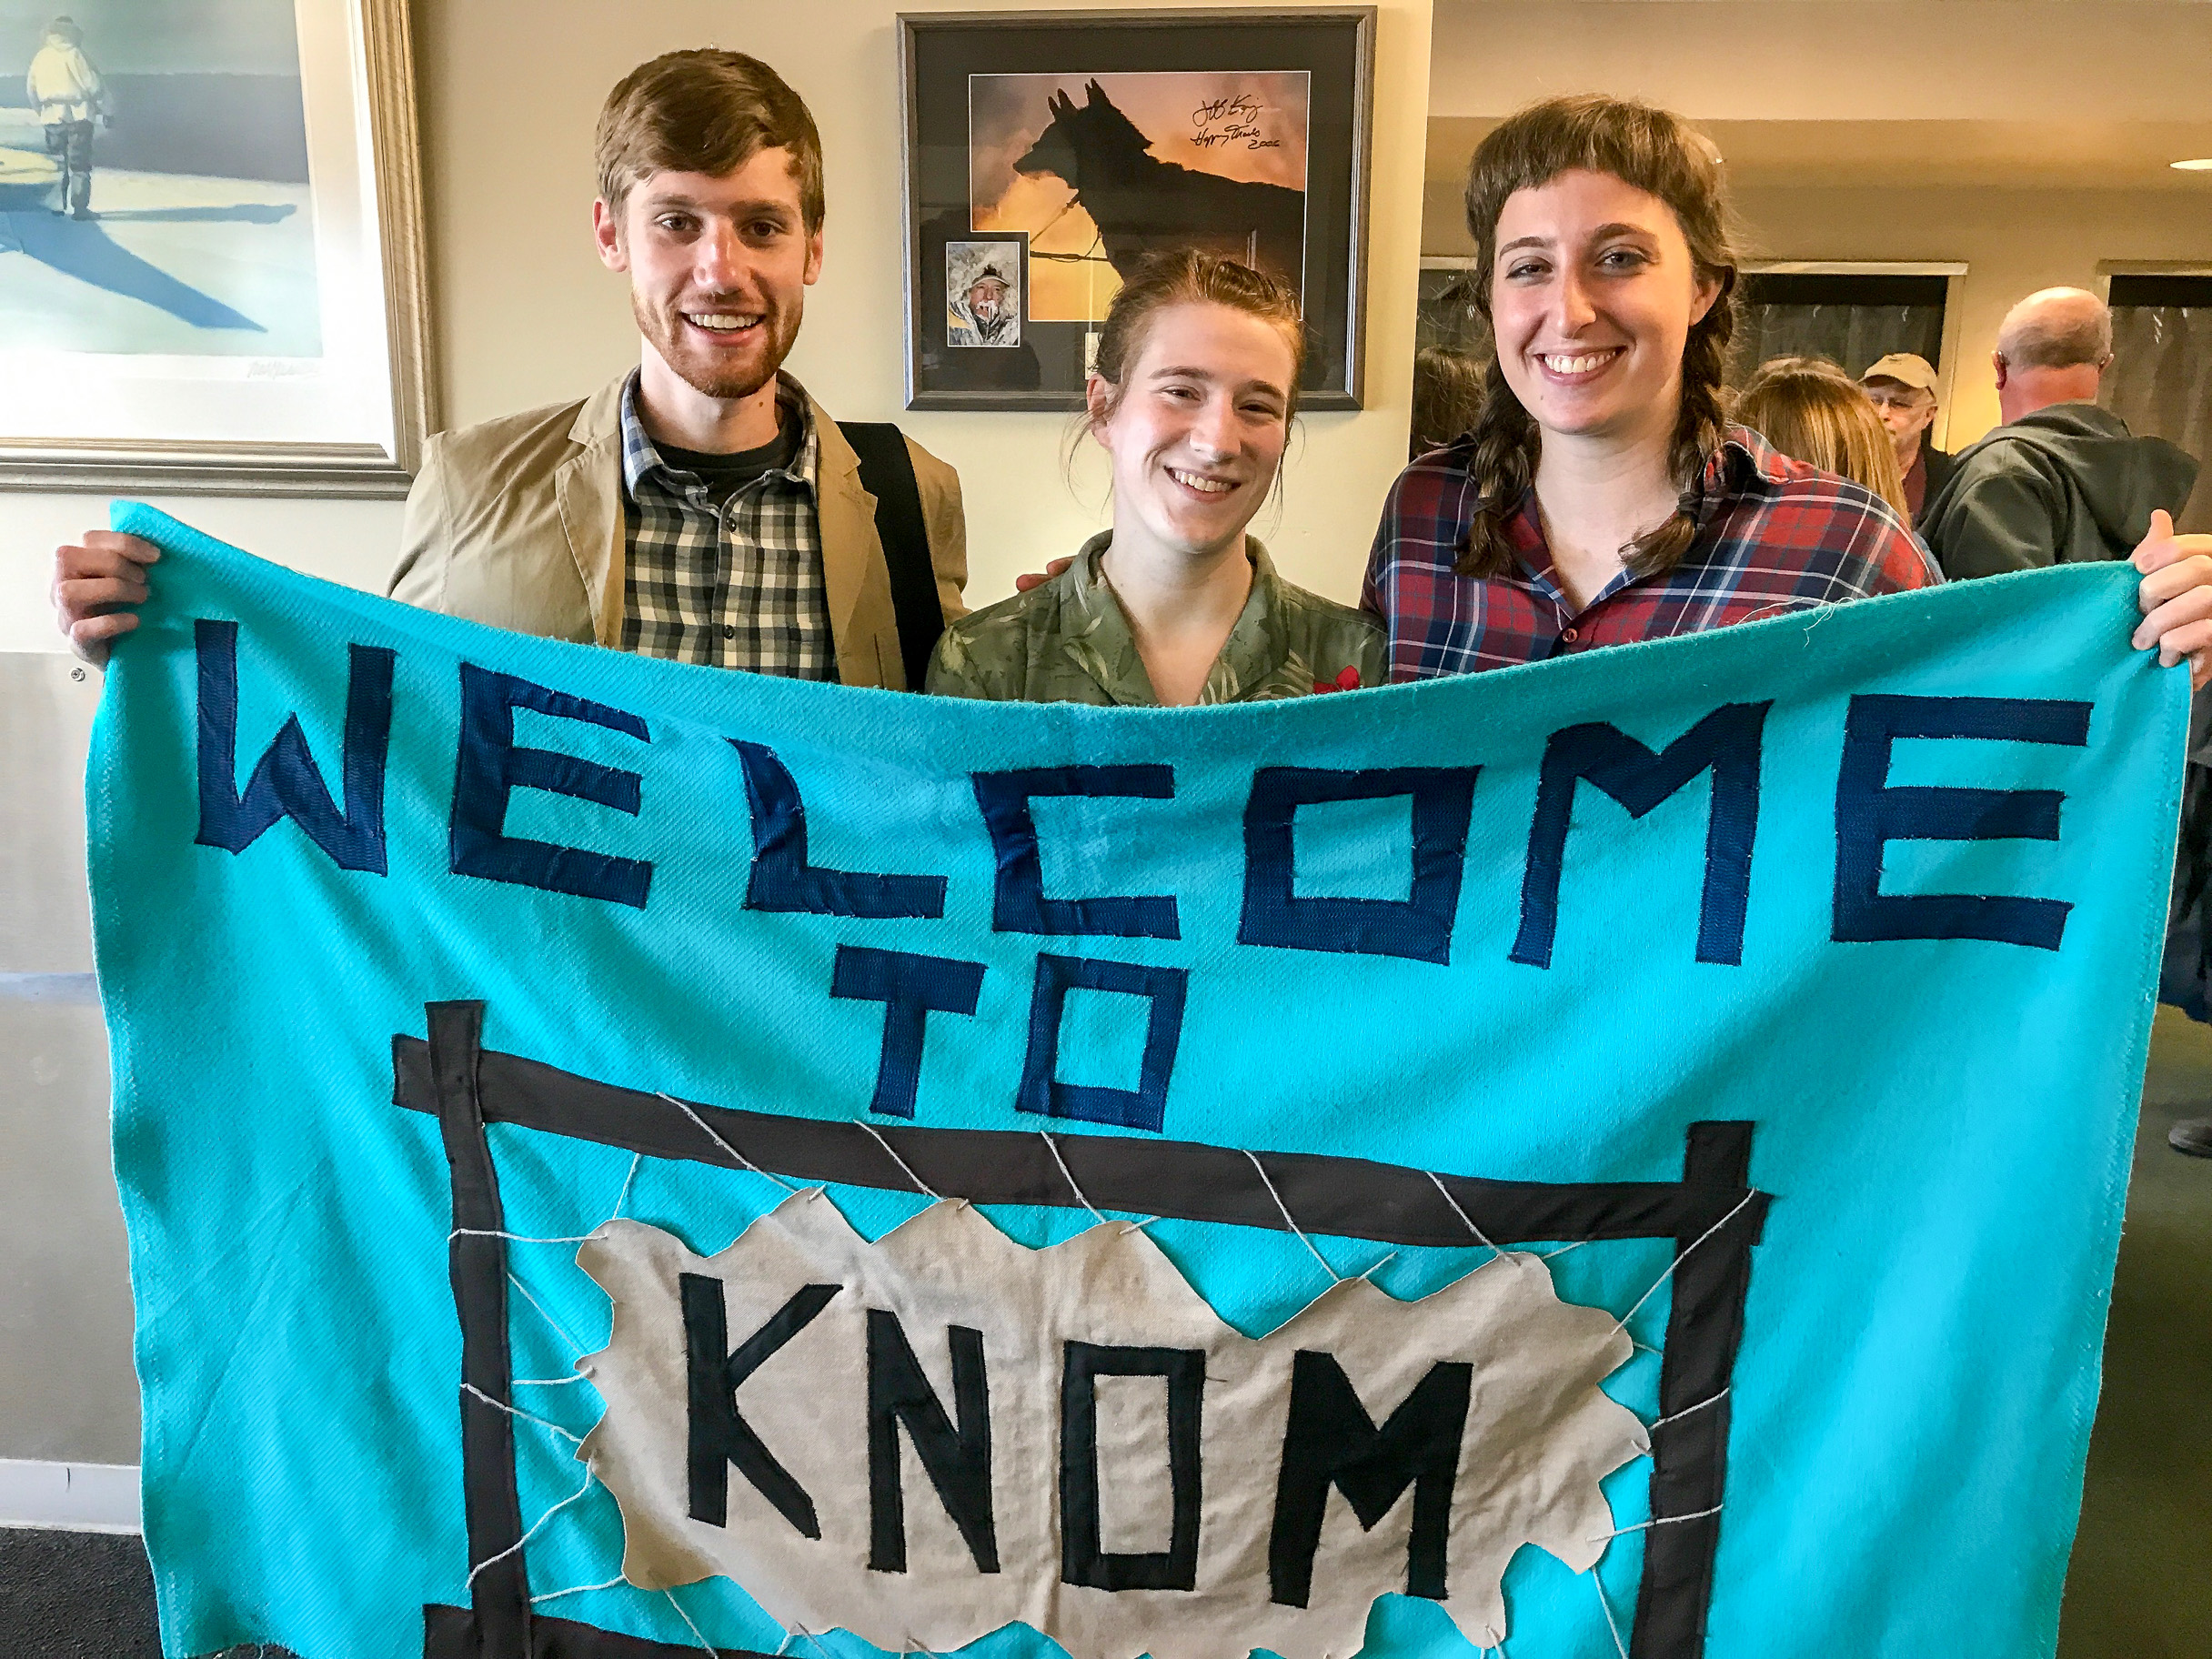 At the Nome airport: Gabe Colombo, Karen Trop, and Zoe Grueskin holding the “Welcome to KNOM” banner that greets newly-arriving volunteers.